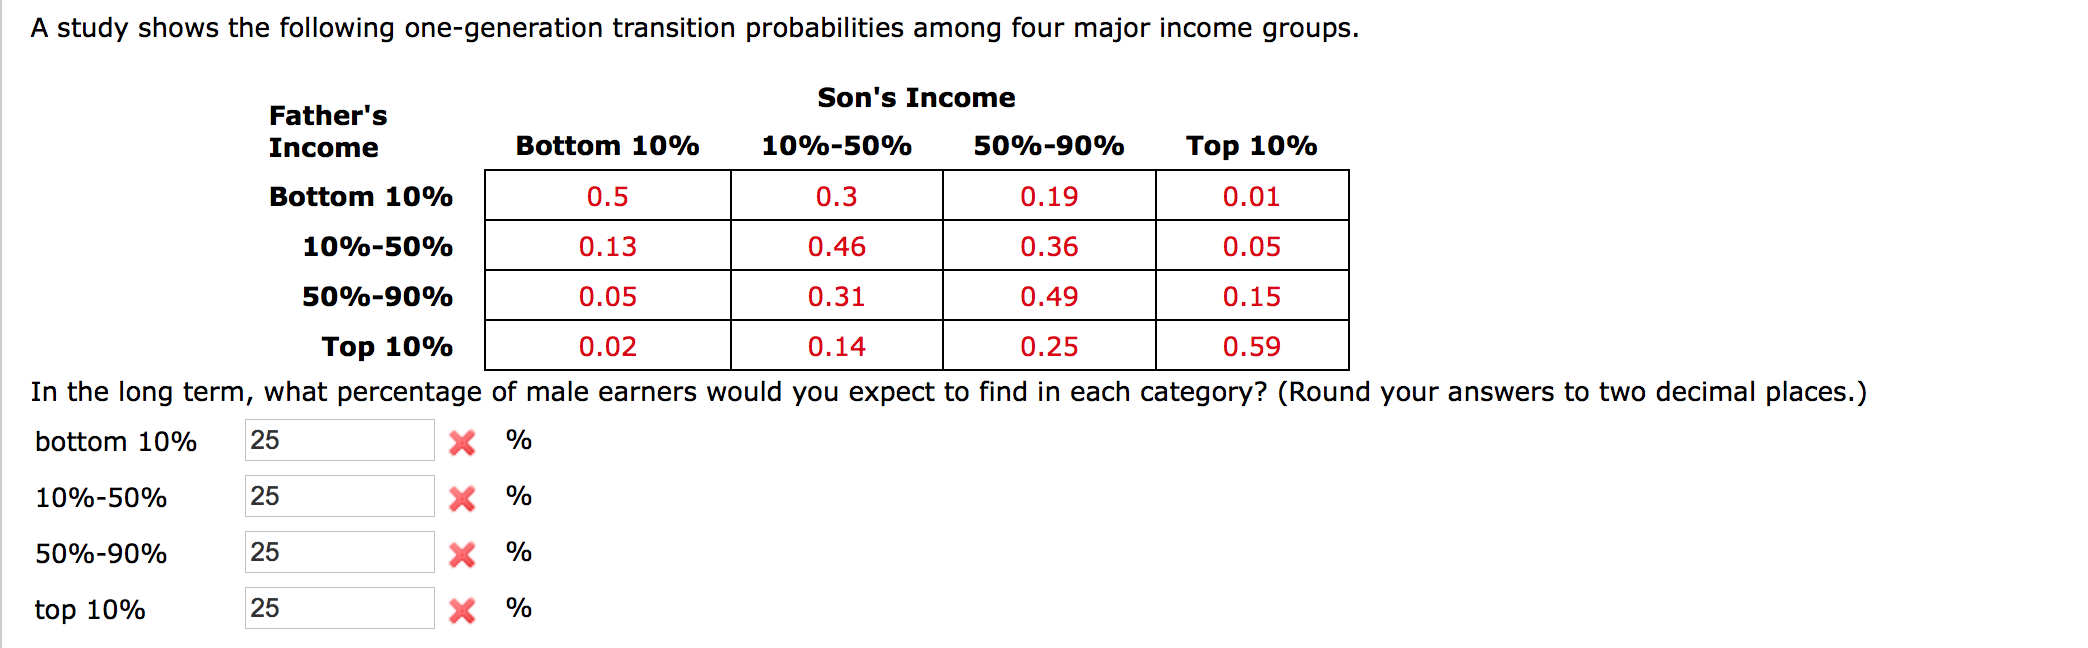 A study shows the following one-generation transition probabilities among four major income groups.
Son's Income
Father's
Income
Bottom 10%
10%-50%
50%-90%
Top 10%
Bottom 10%
0.5
0.3
0.19
0.01
10%-50%
0.13
0.46
0.36
0.05
50%-90%
0.05
0.31
0.49
0.15
Top 10%
0.02
0.14
0.25
0.59
In the long term, what percentage of male earners would you expect to find in each category? (Round your answers to two decimal places.)
bottom 10%
25
X %
10%-50%
25
%
50%-90%
25
%
top 10%
25
%
